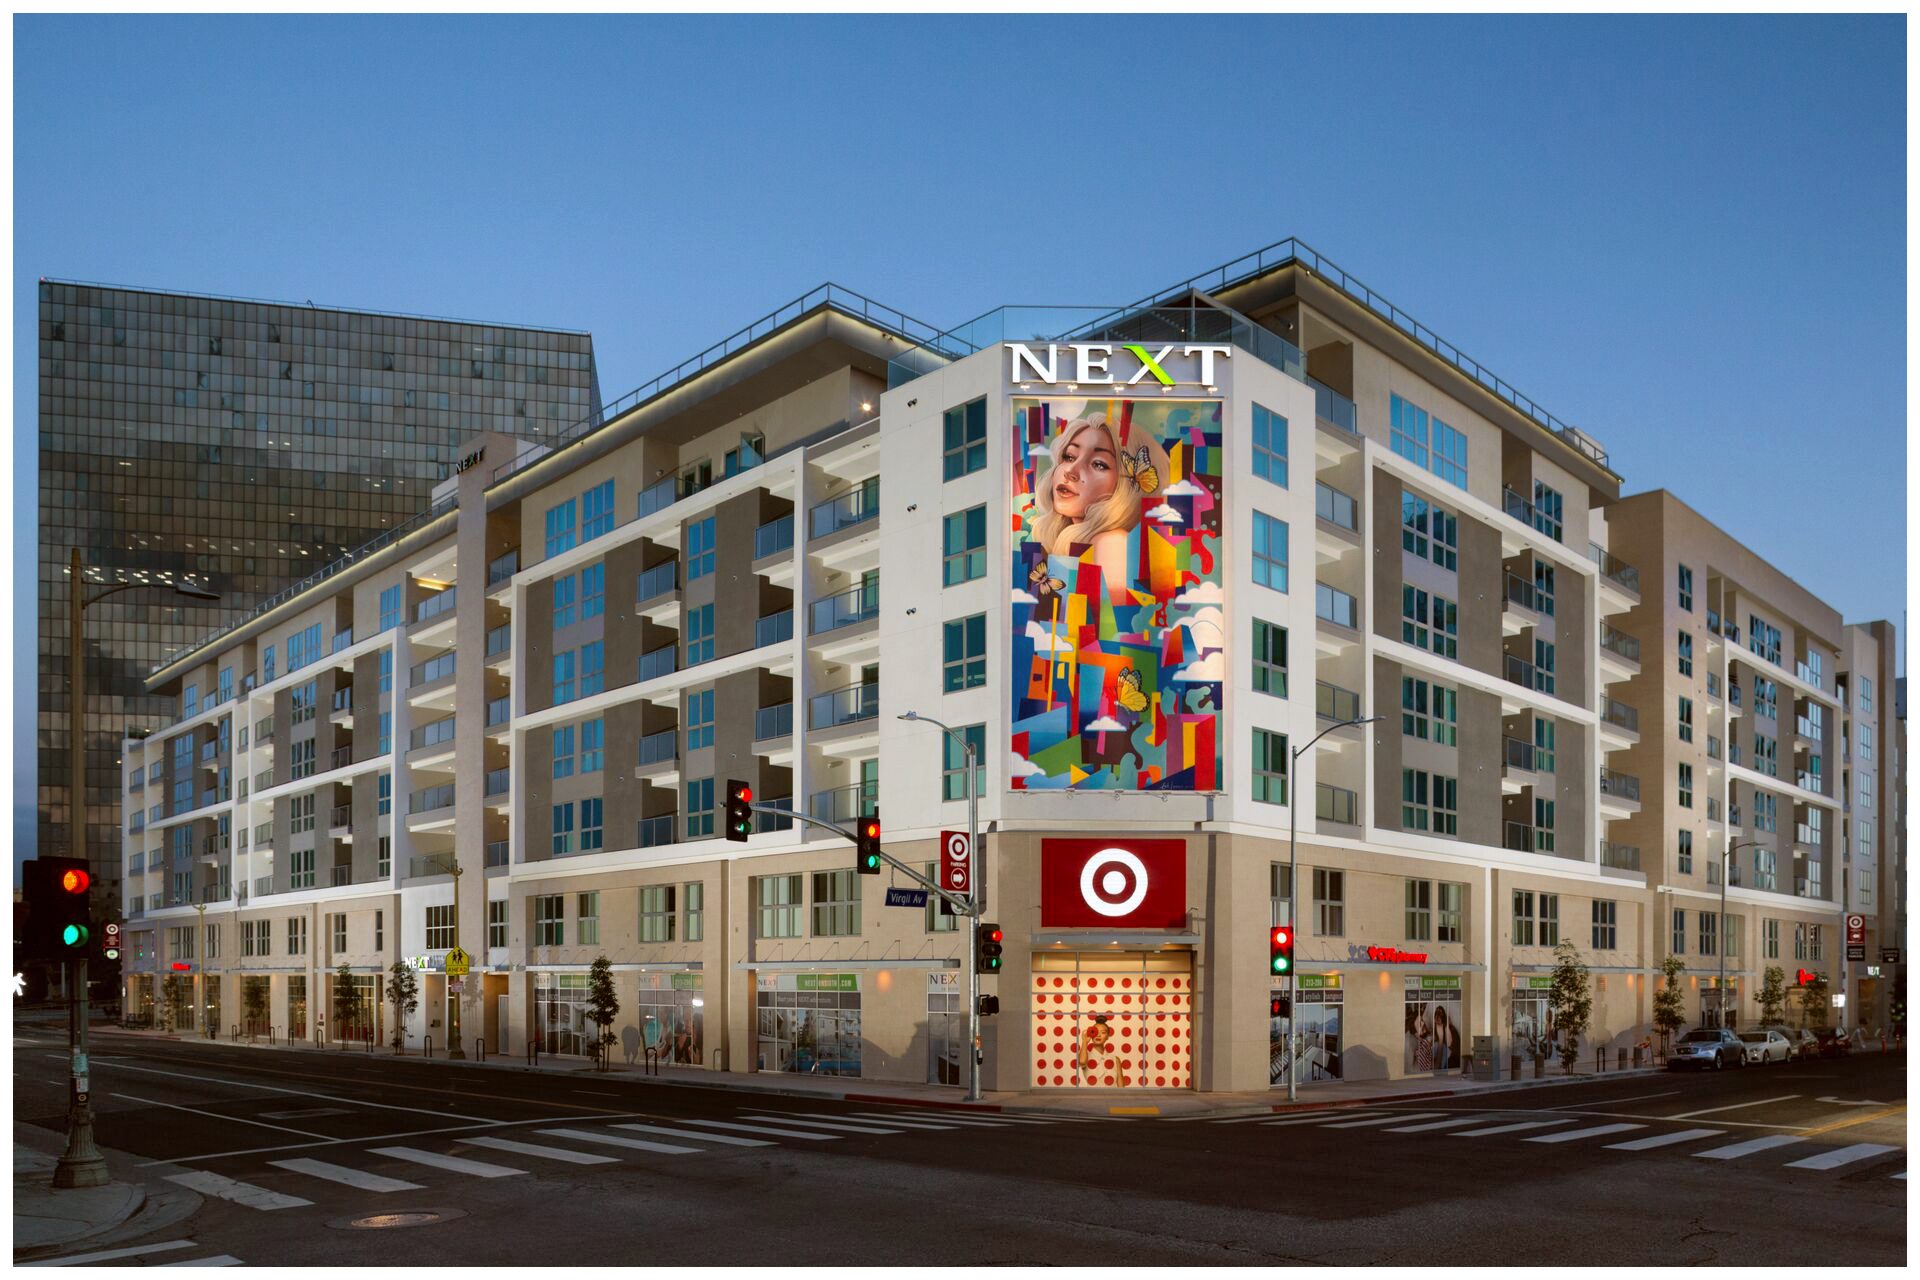 NEXT ON SIXTH - KOREA TOWN399 Upscale Residential units and 42,600 SF of retail space. Media Systems provided:Public Safety DAS (ERRCS)Commercial Cellular DAS Common Area WiFiCommon Area AV3×3 Video Wall DisplayApartment Audio System in all Penthouse units.